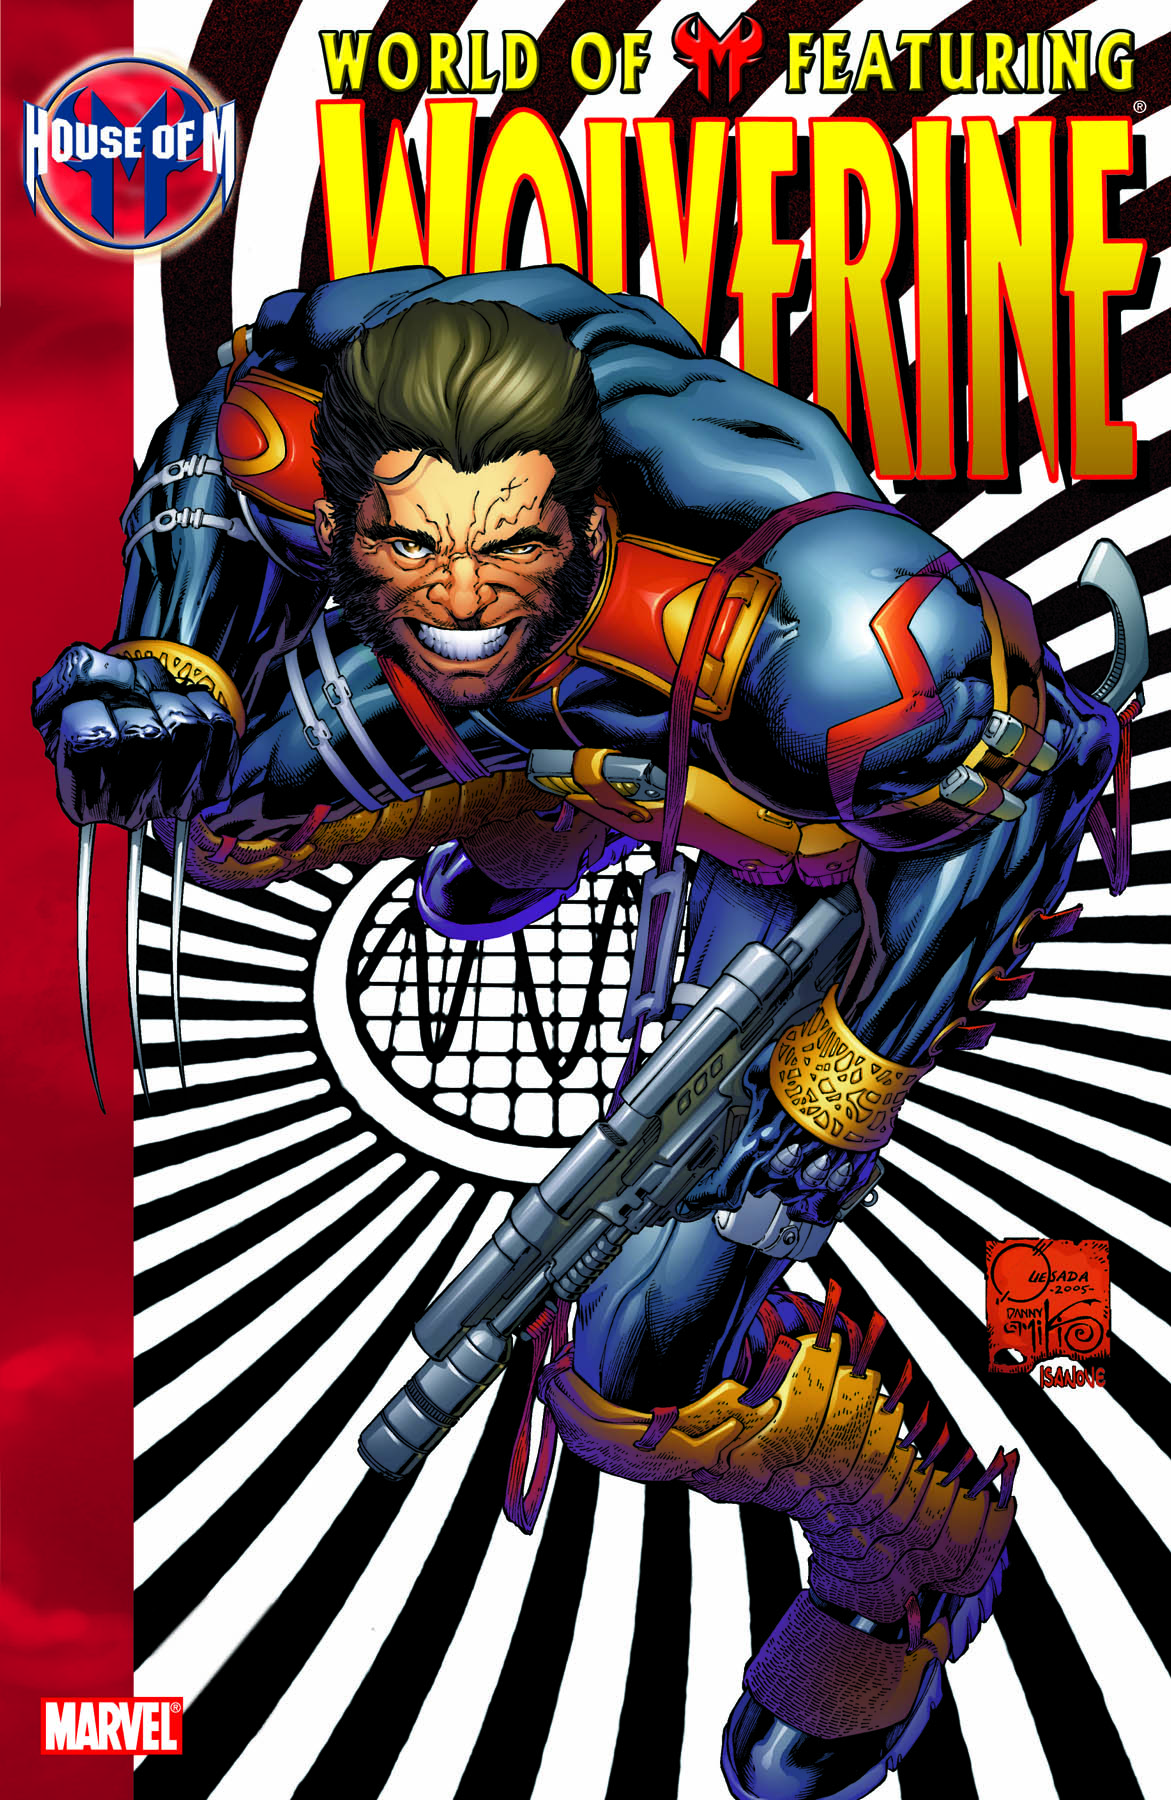 HOUSE OF M: WORLD OF M FEATURING WOLVERINE TPB (Trade Paperback)